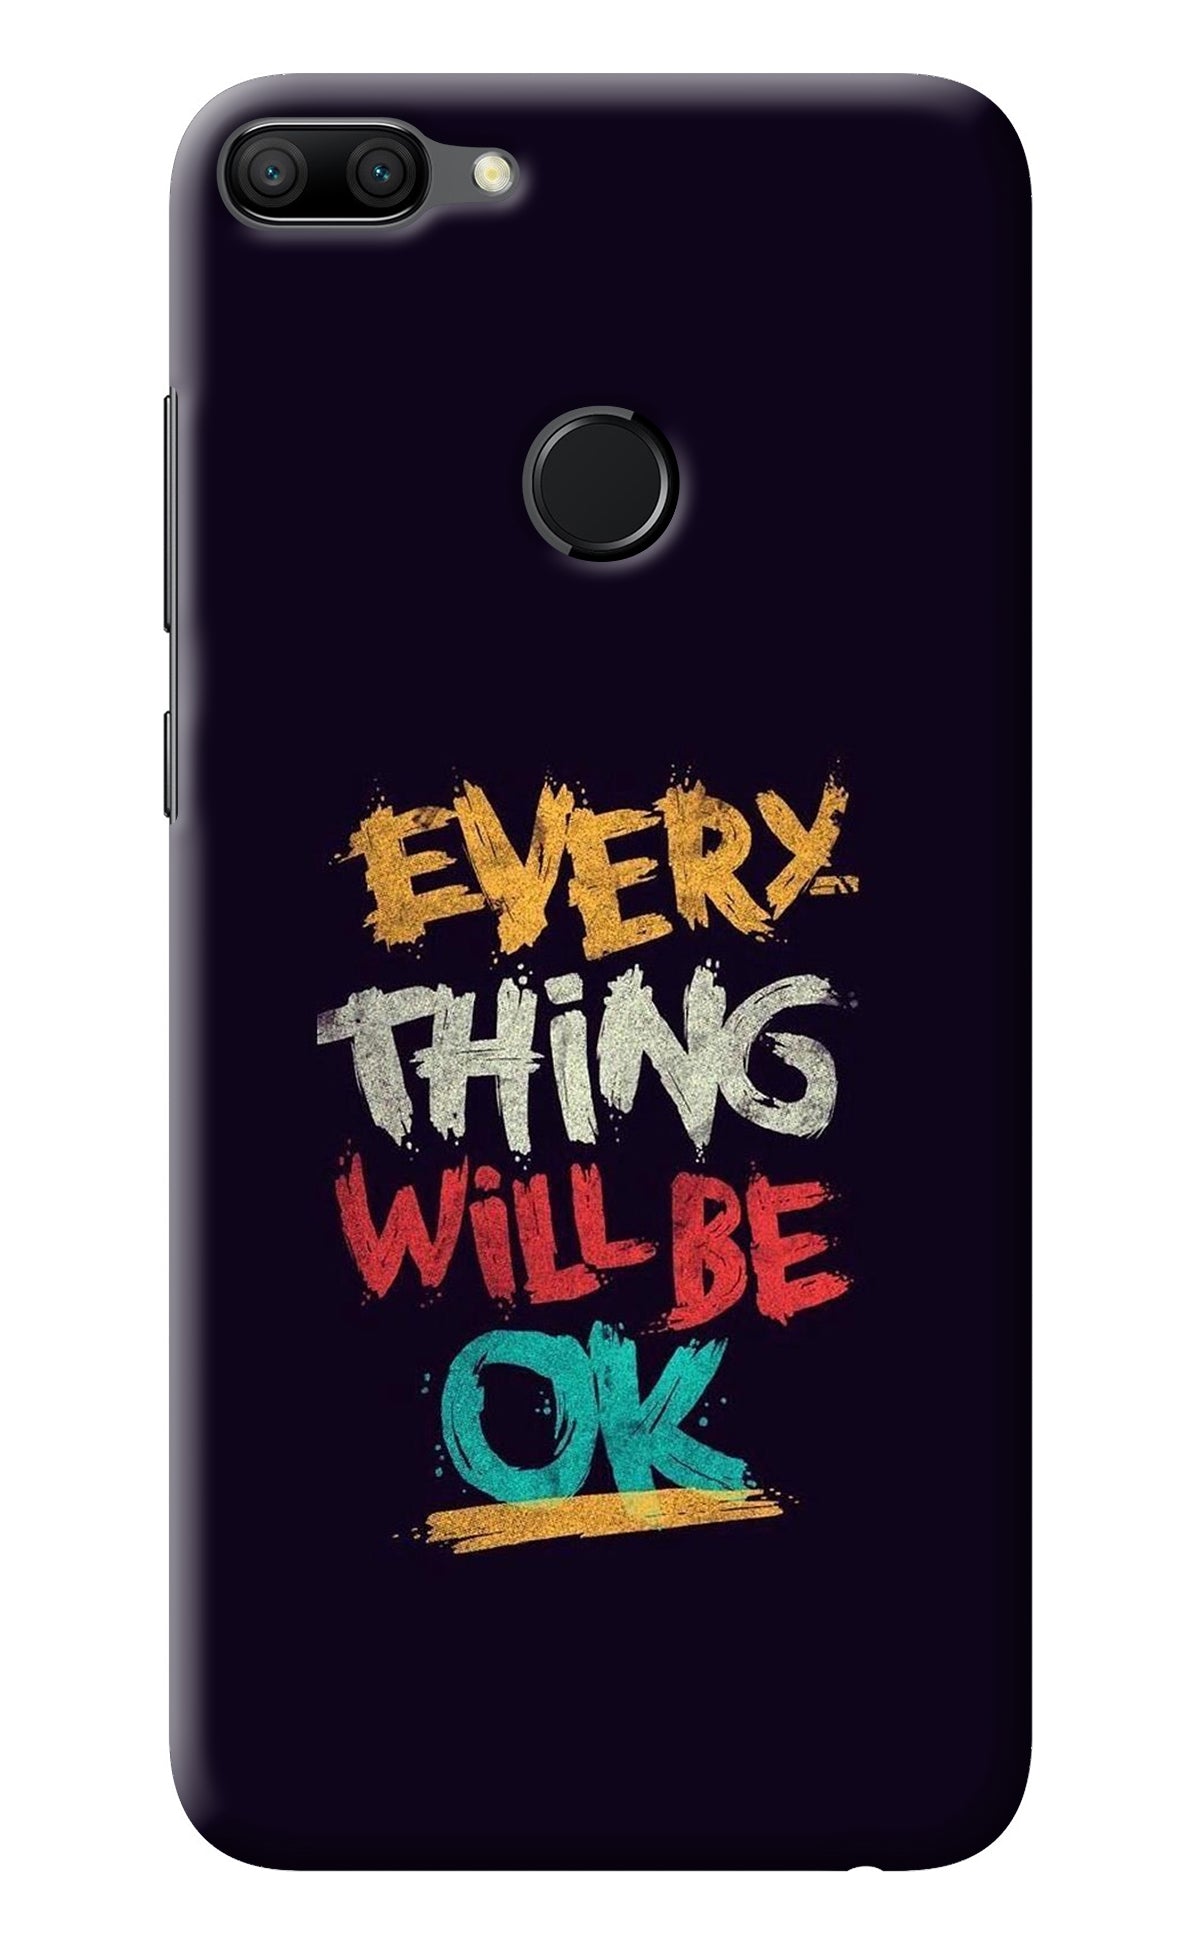 Everything Will Be Ok Honor 9N Back Cover